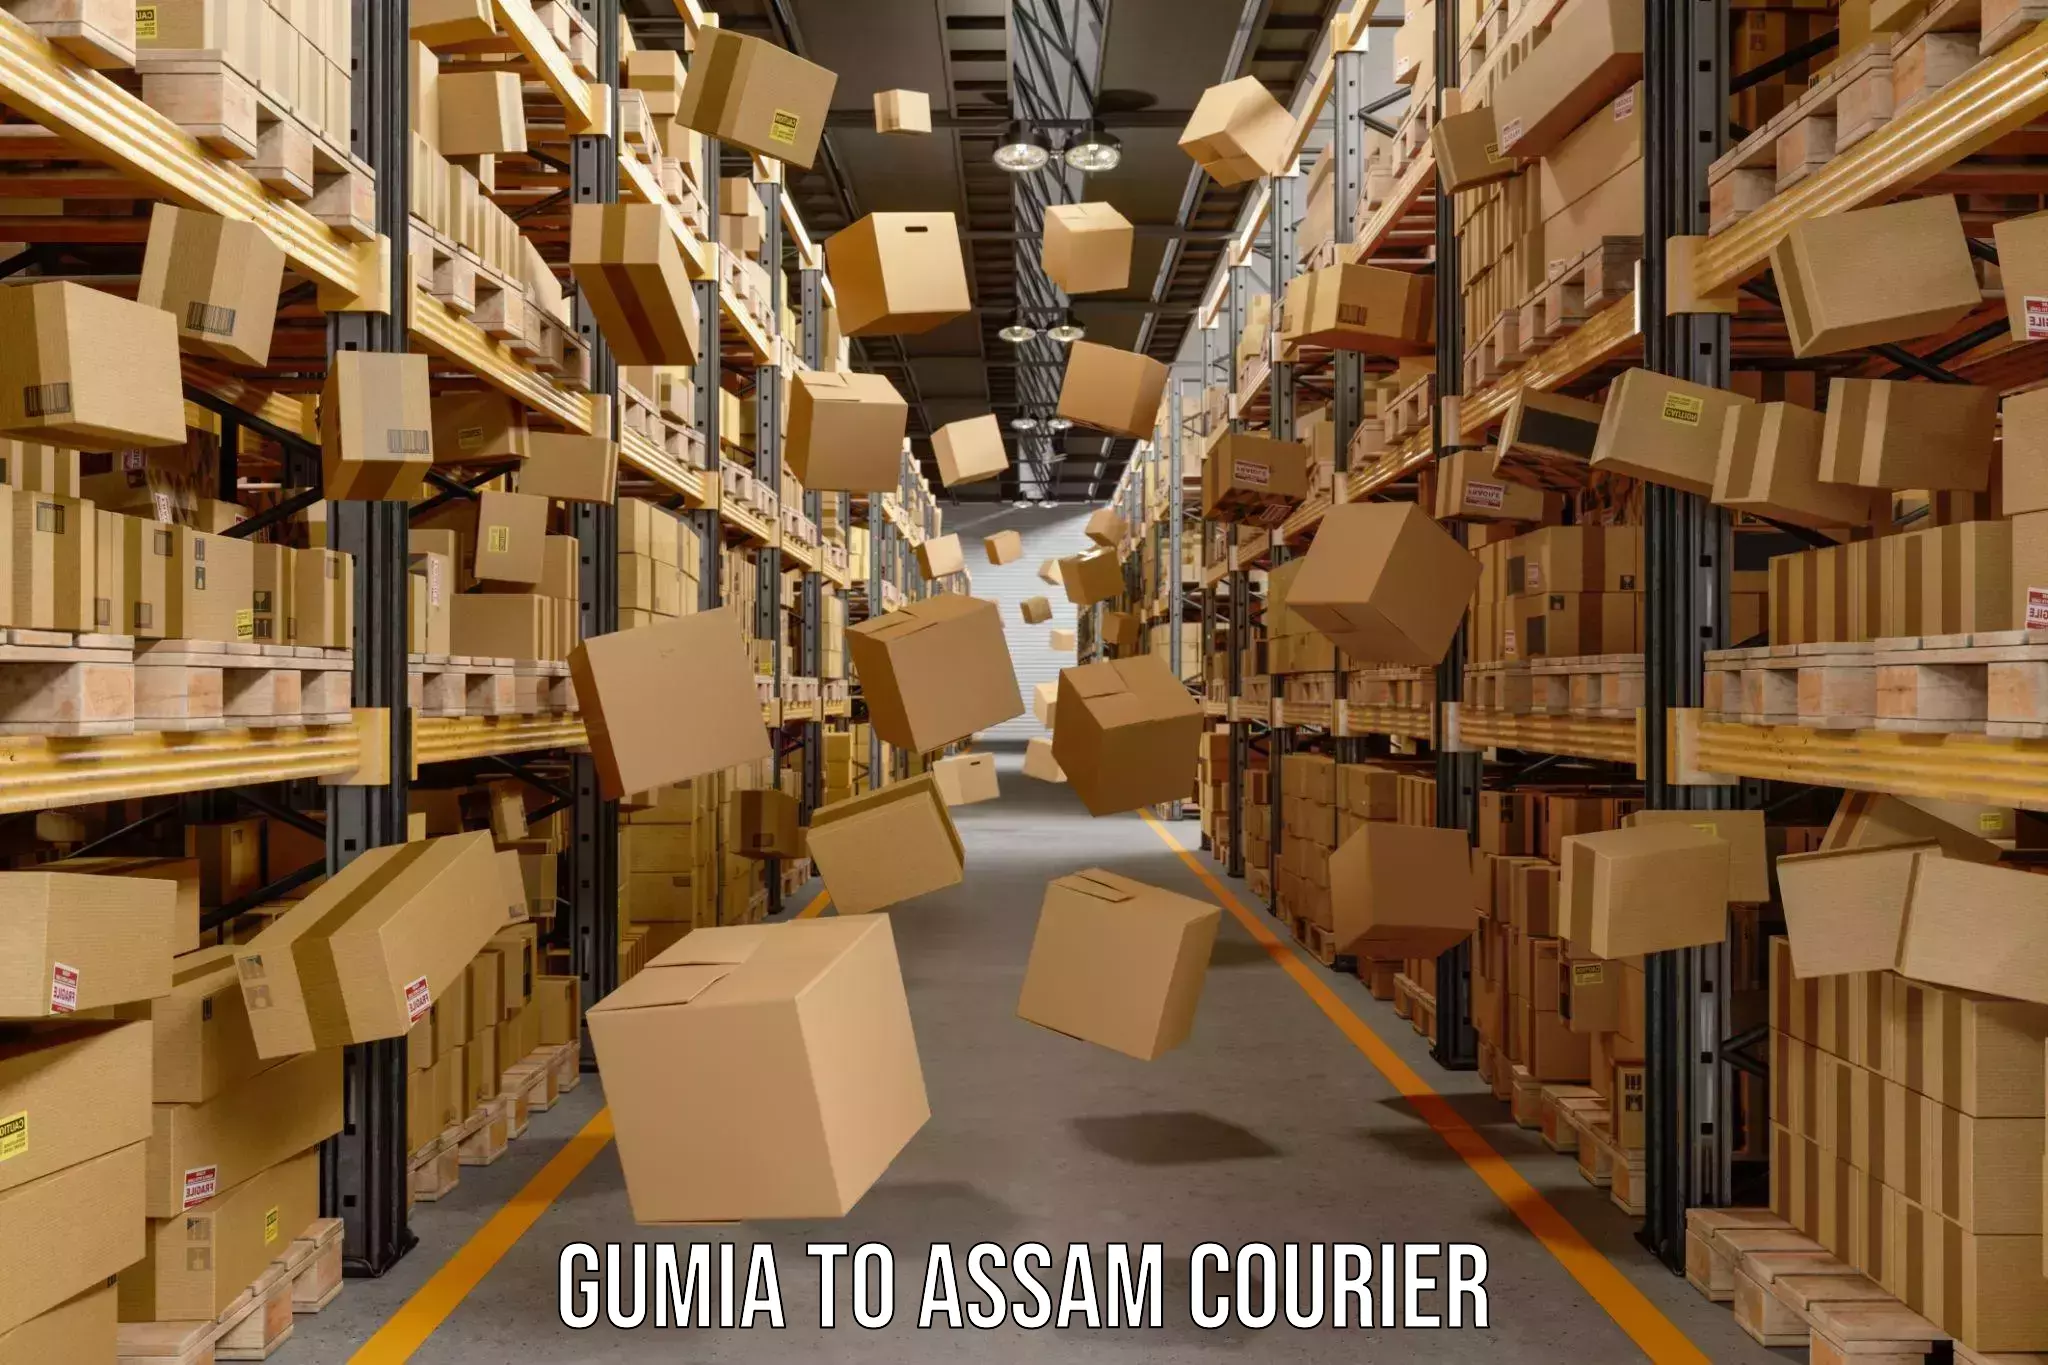 Weekend courier service in Gumia to IIIT Guwahati